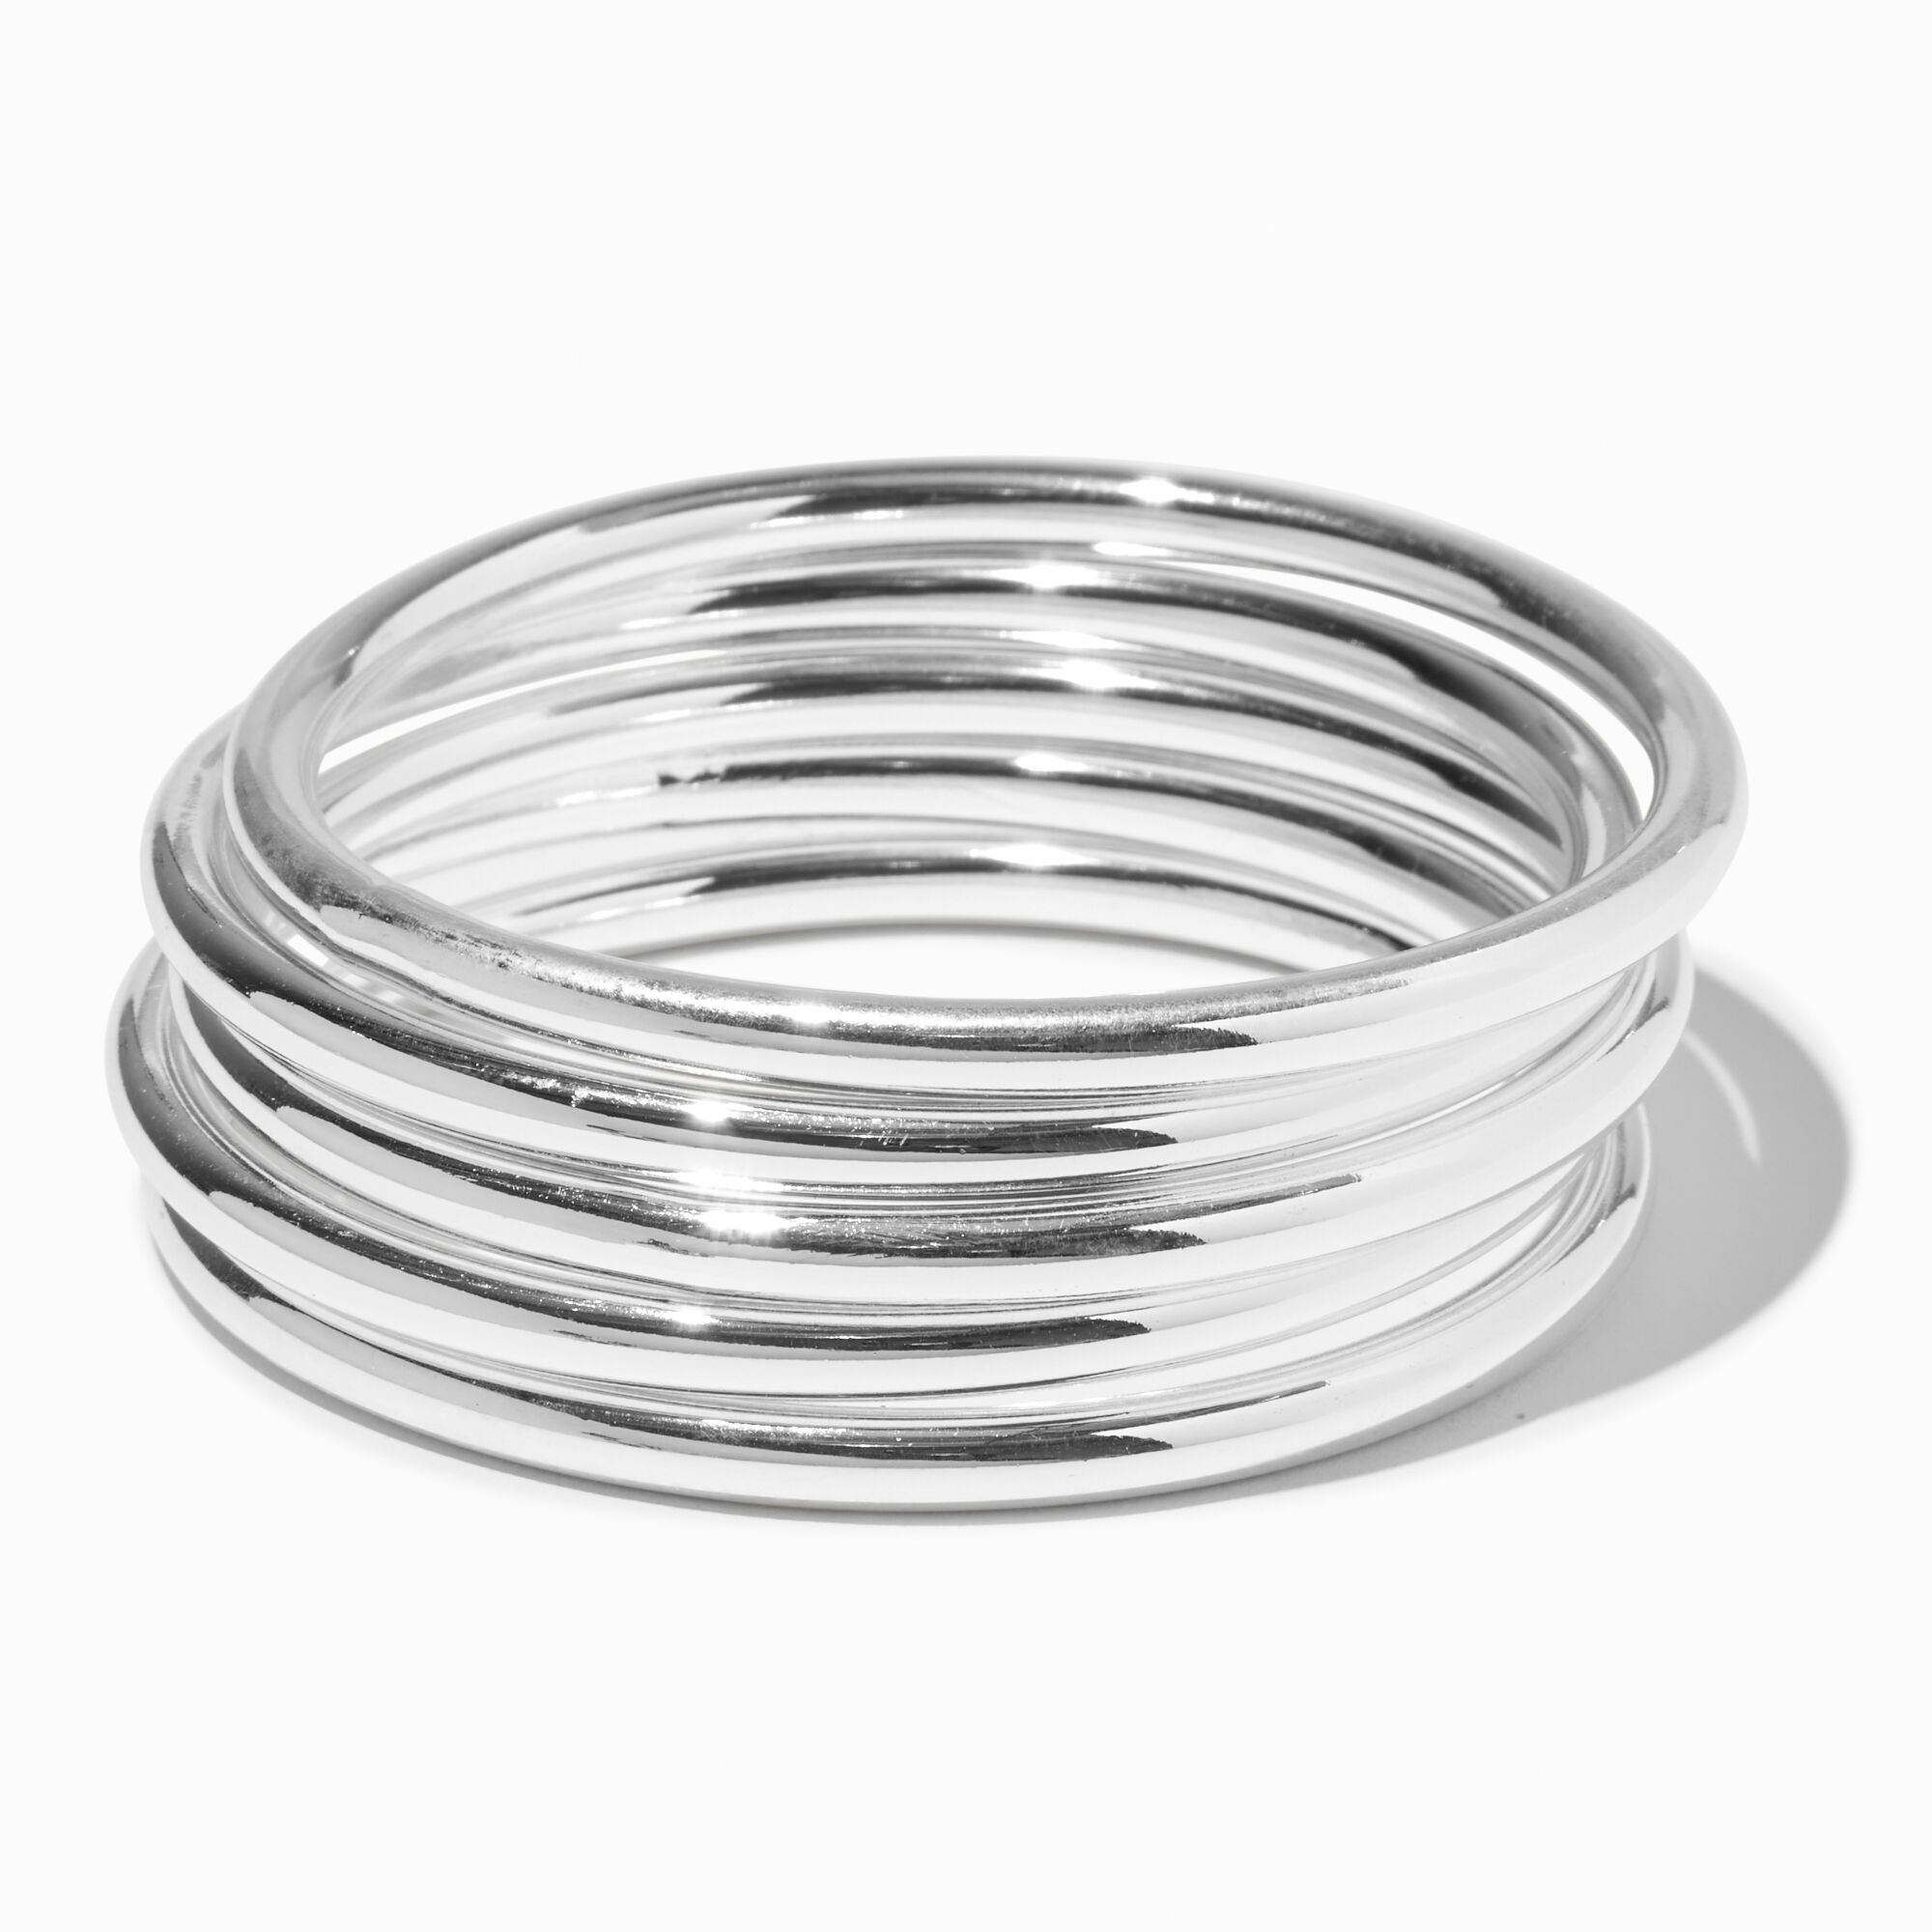 View Claires Tone Thick Bangle Bracelets 5 Pack Silver information